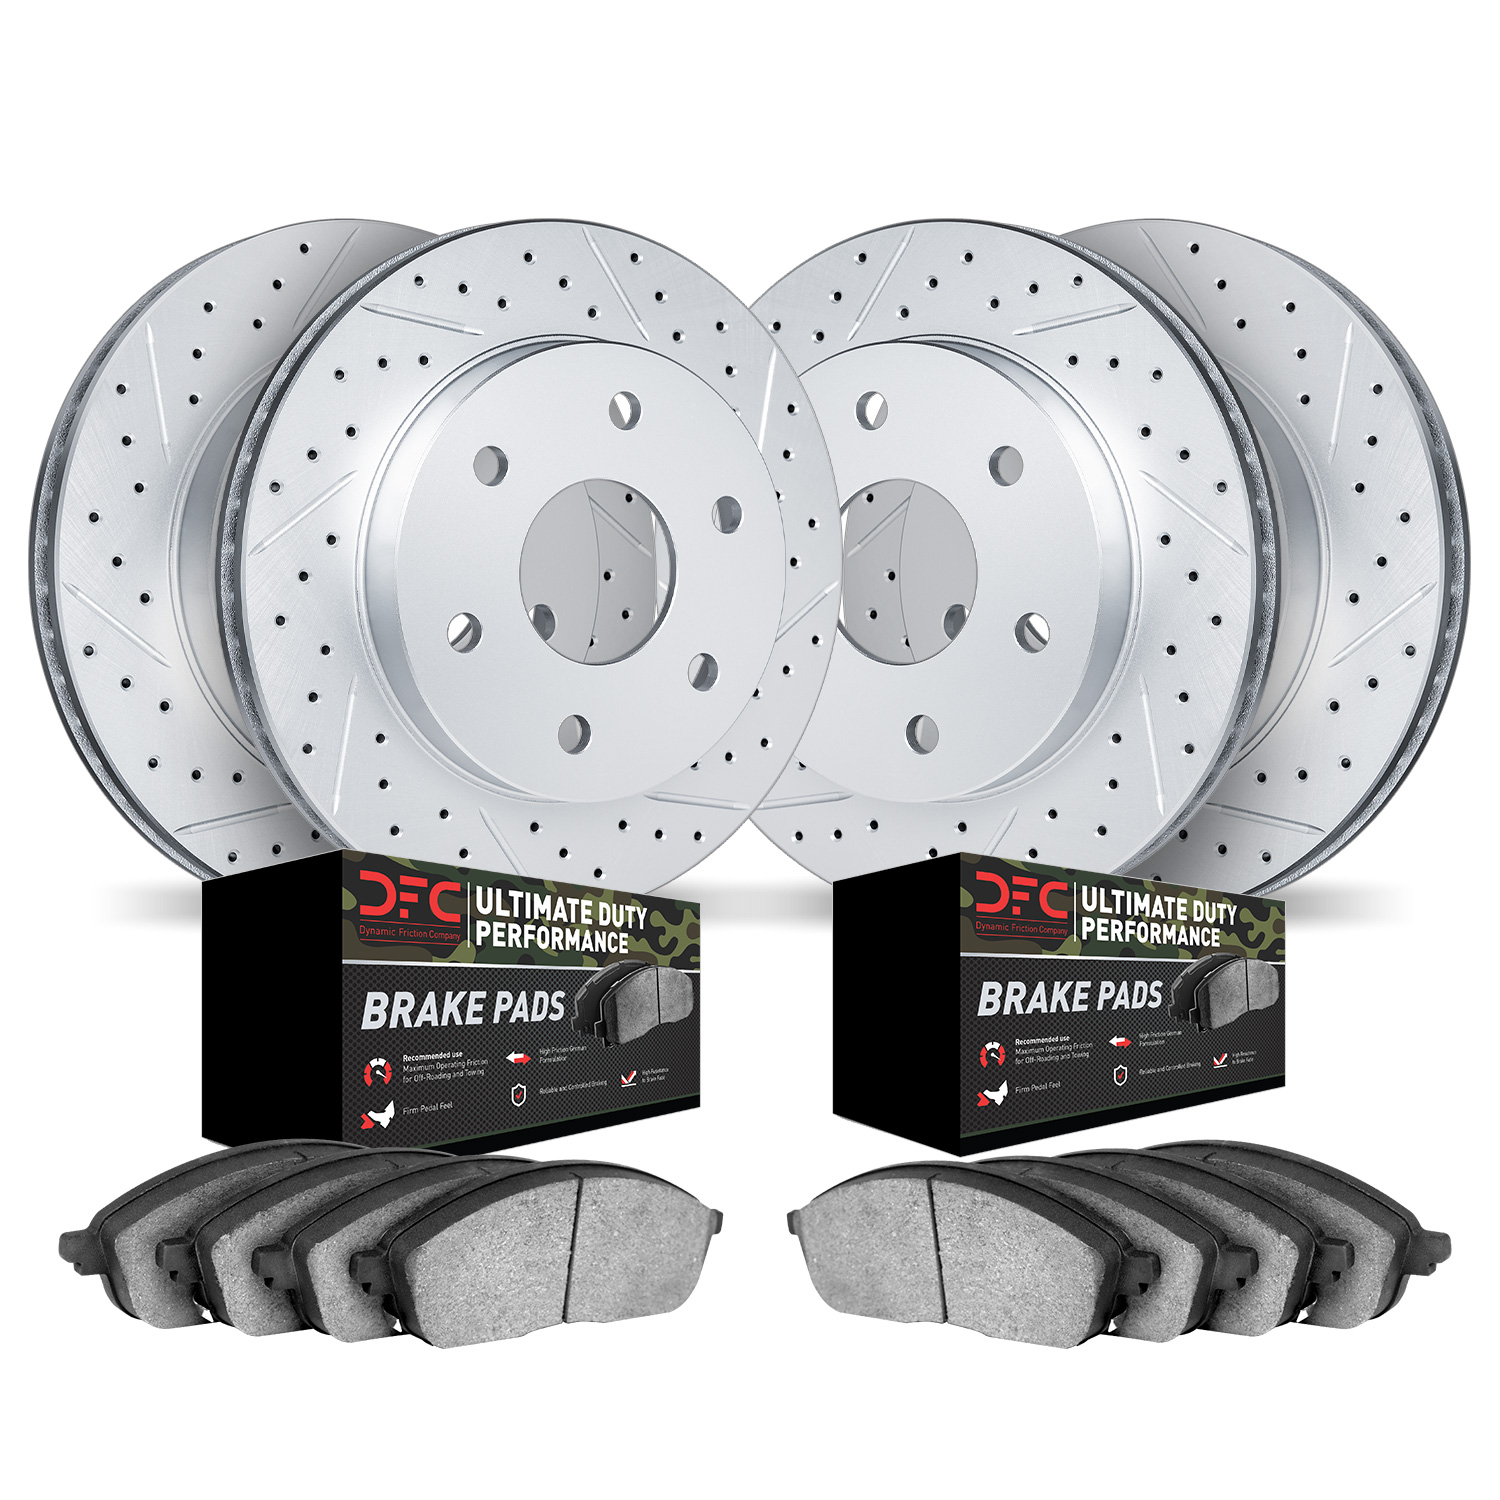 2404-54024 Geoperformance Drilled/Slotted Brake Rotors with Ultimate-Duty Brake Pads Kit, 2004-2008 Ford/Lincoln/Mercury/Mazda,